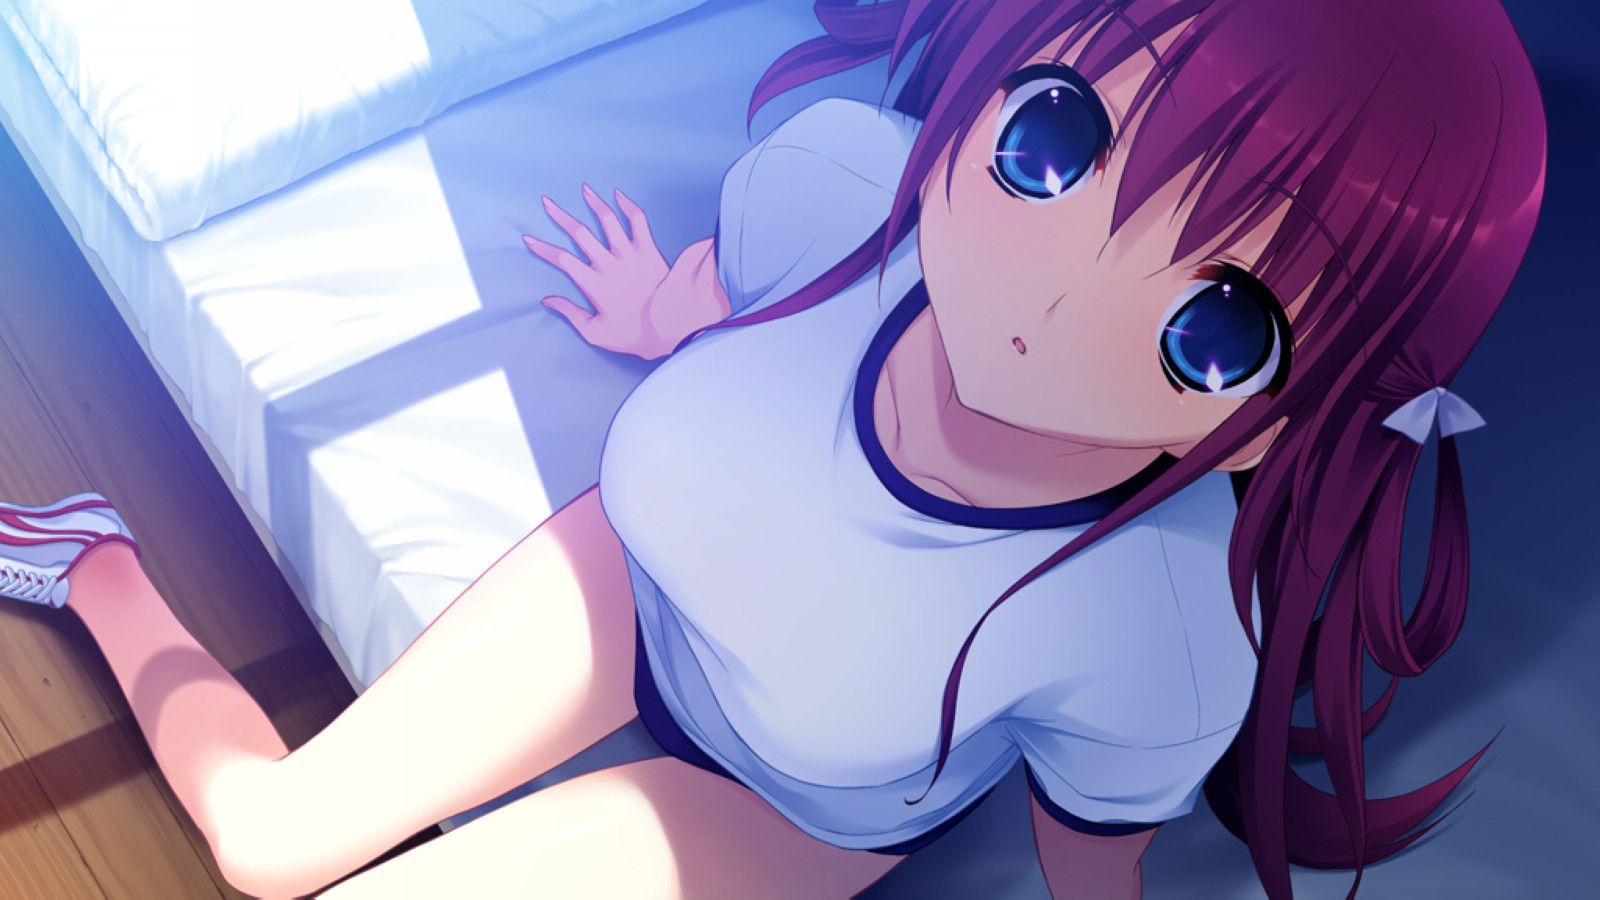 Characters appearing in The Fruit of Grisaia Anime